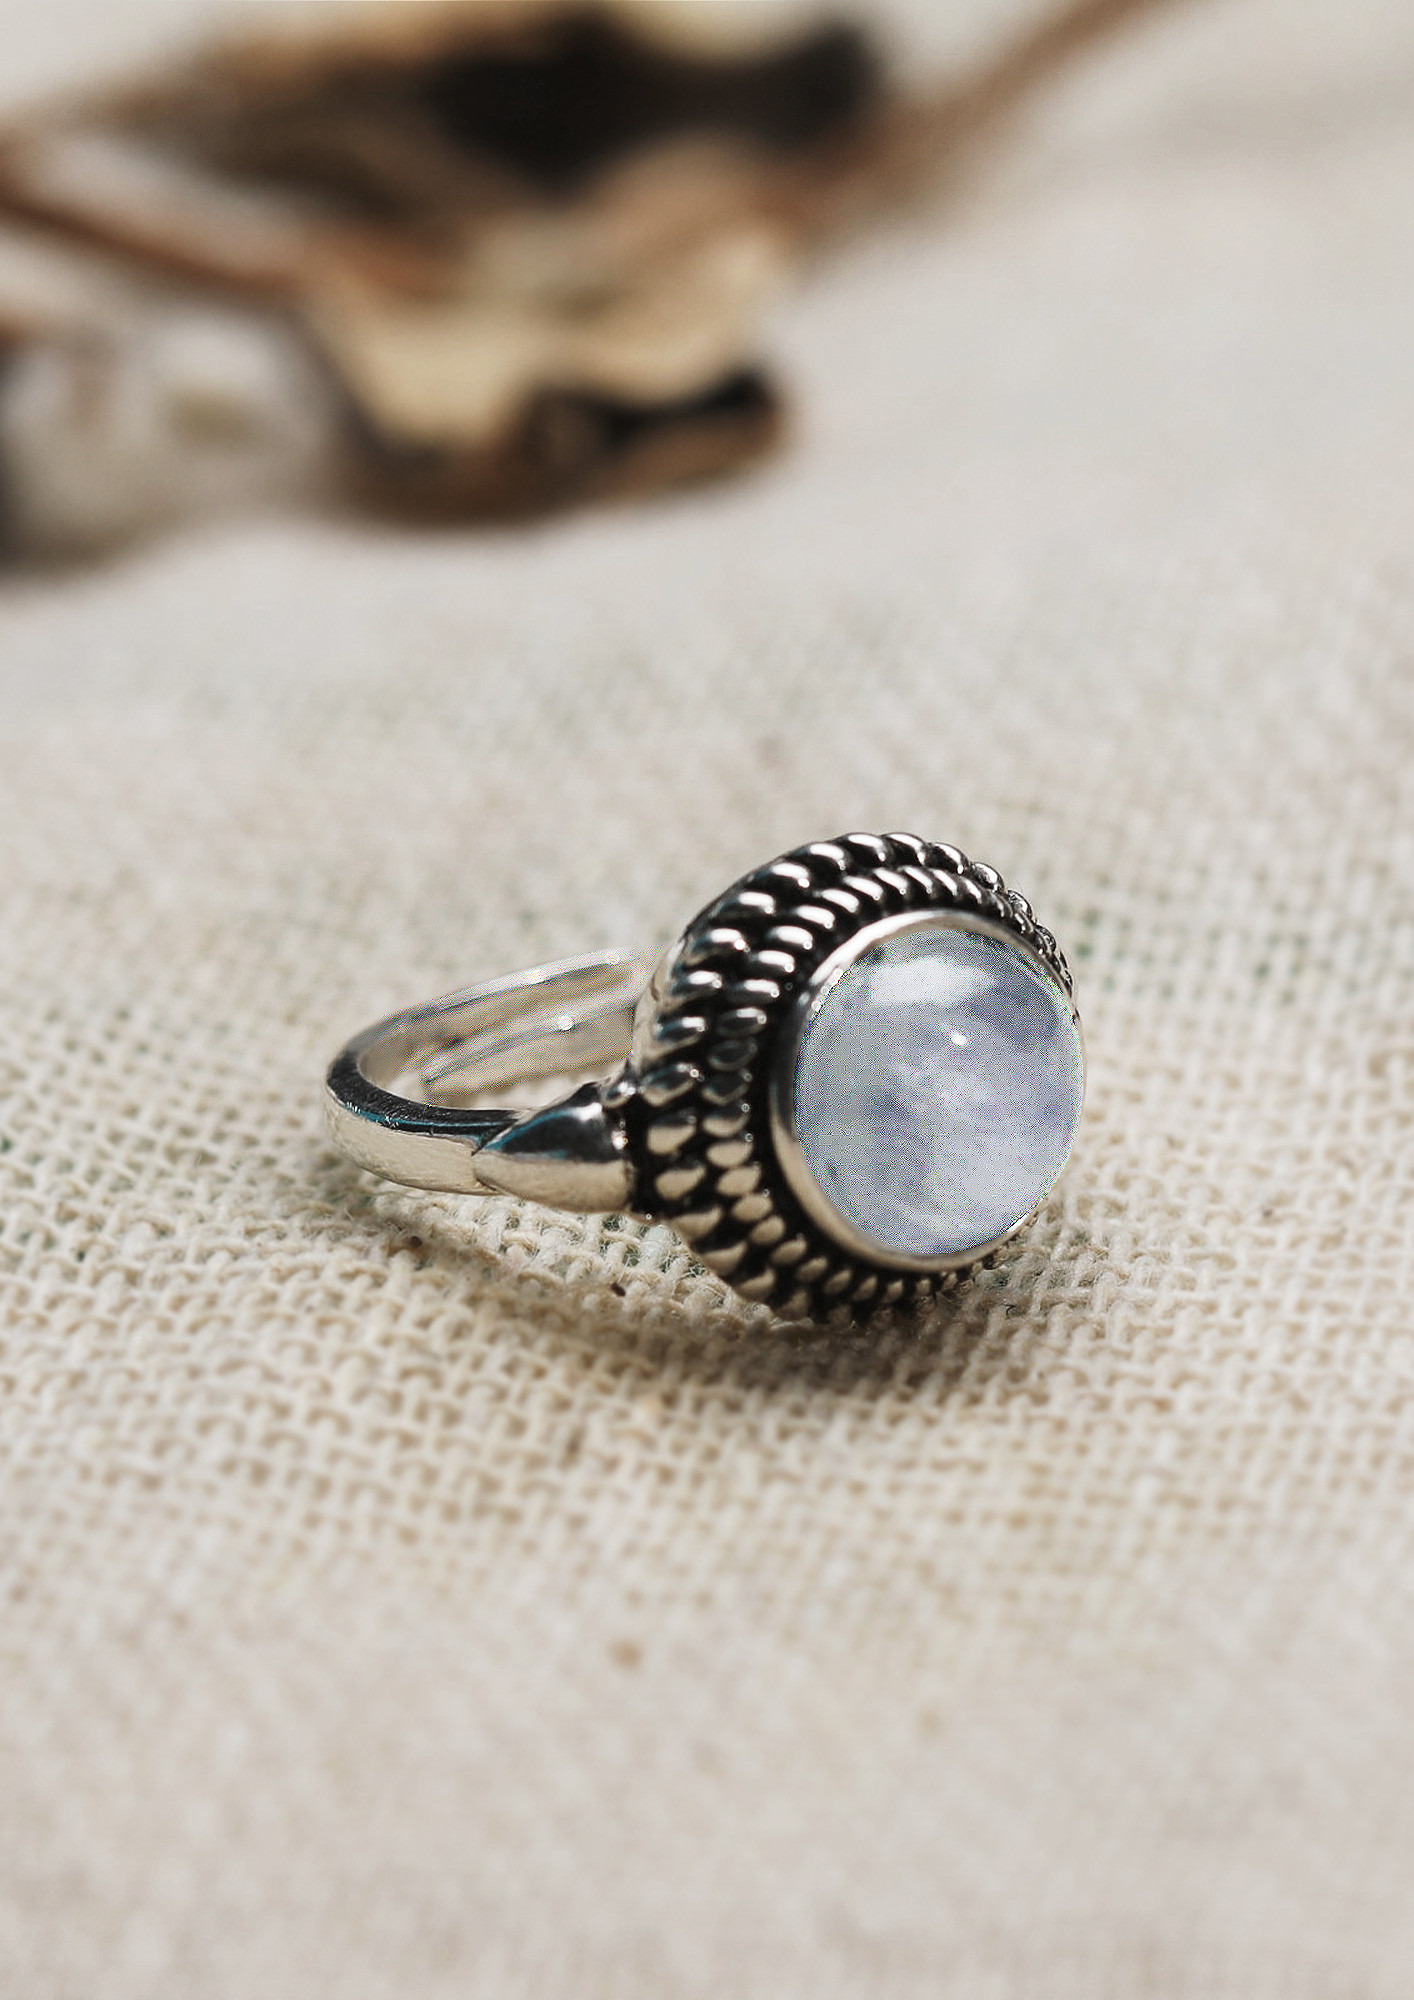 This Valentine's Day, Give a Moonstone Engagement Ring - Connoisseurs  Jewelry Cleaner